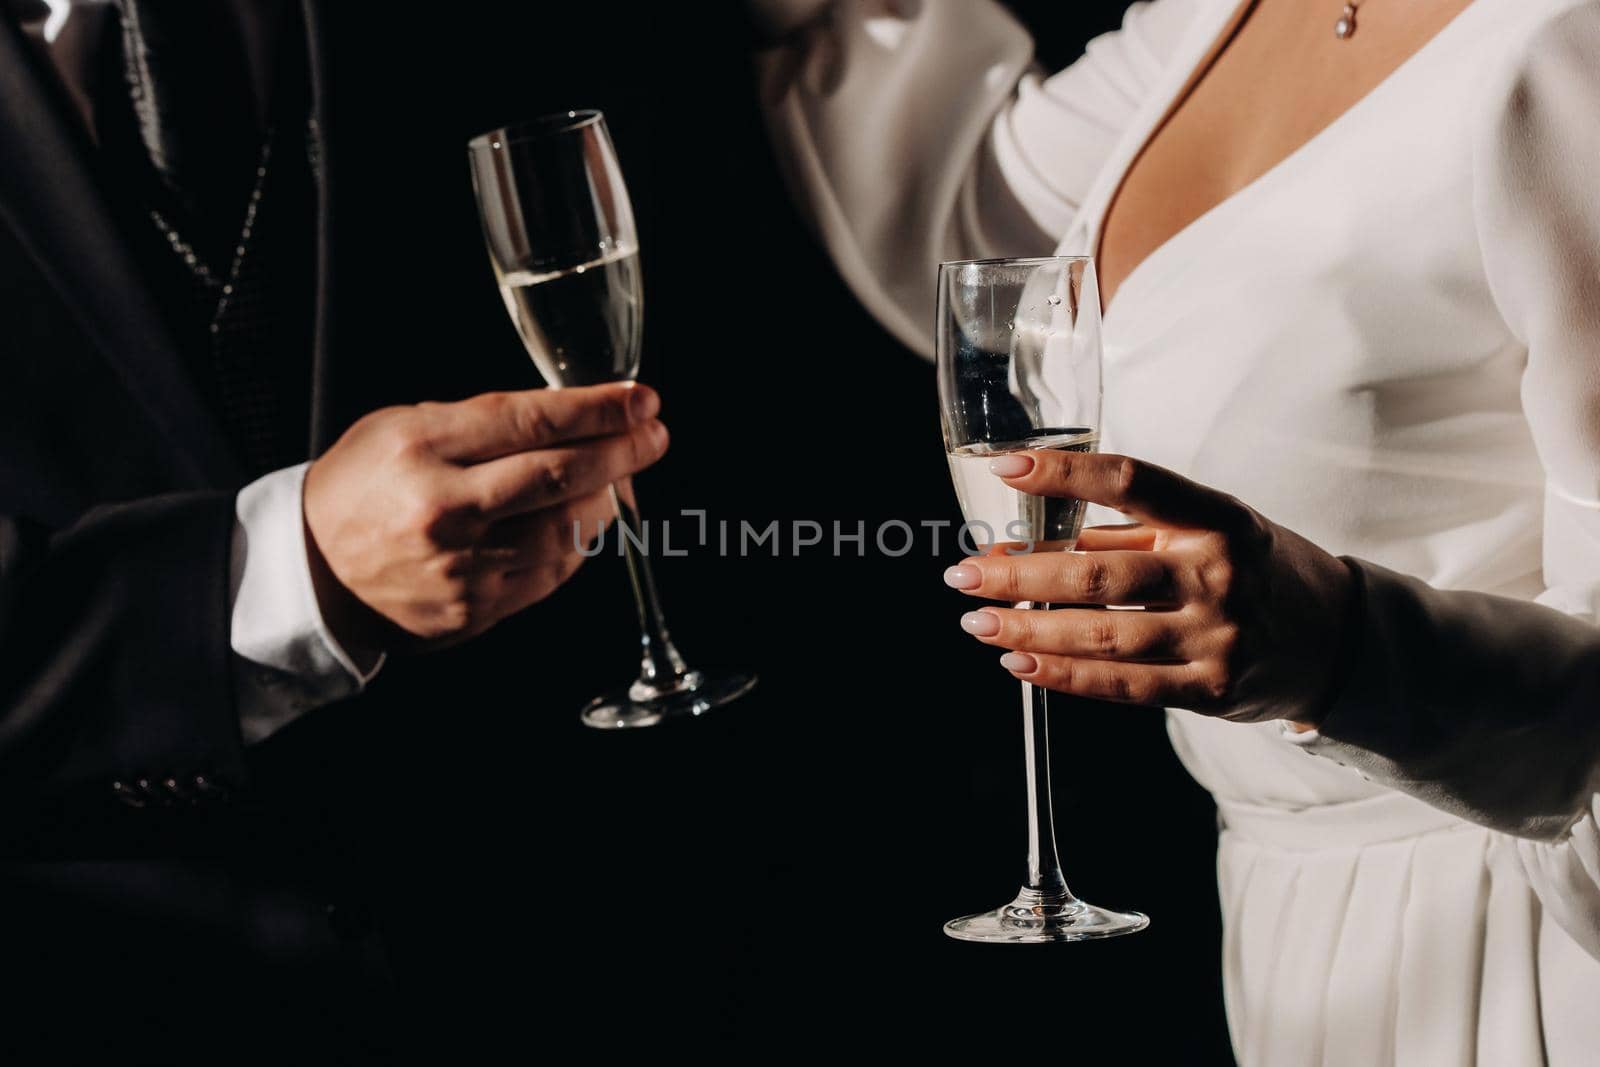 A man and a woman hold champagne glasses in their hands close-up.